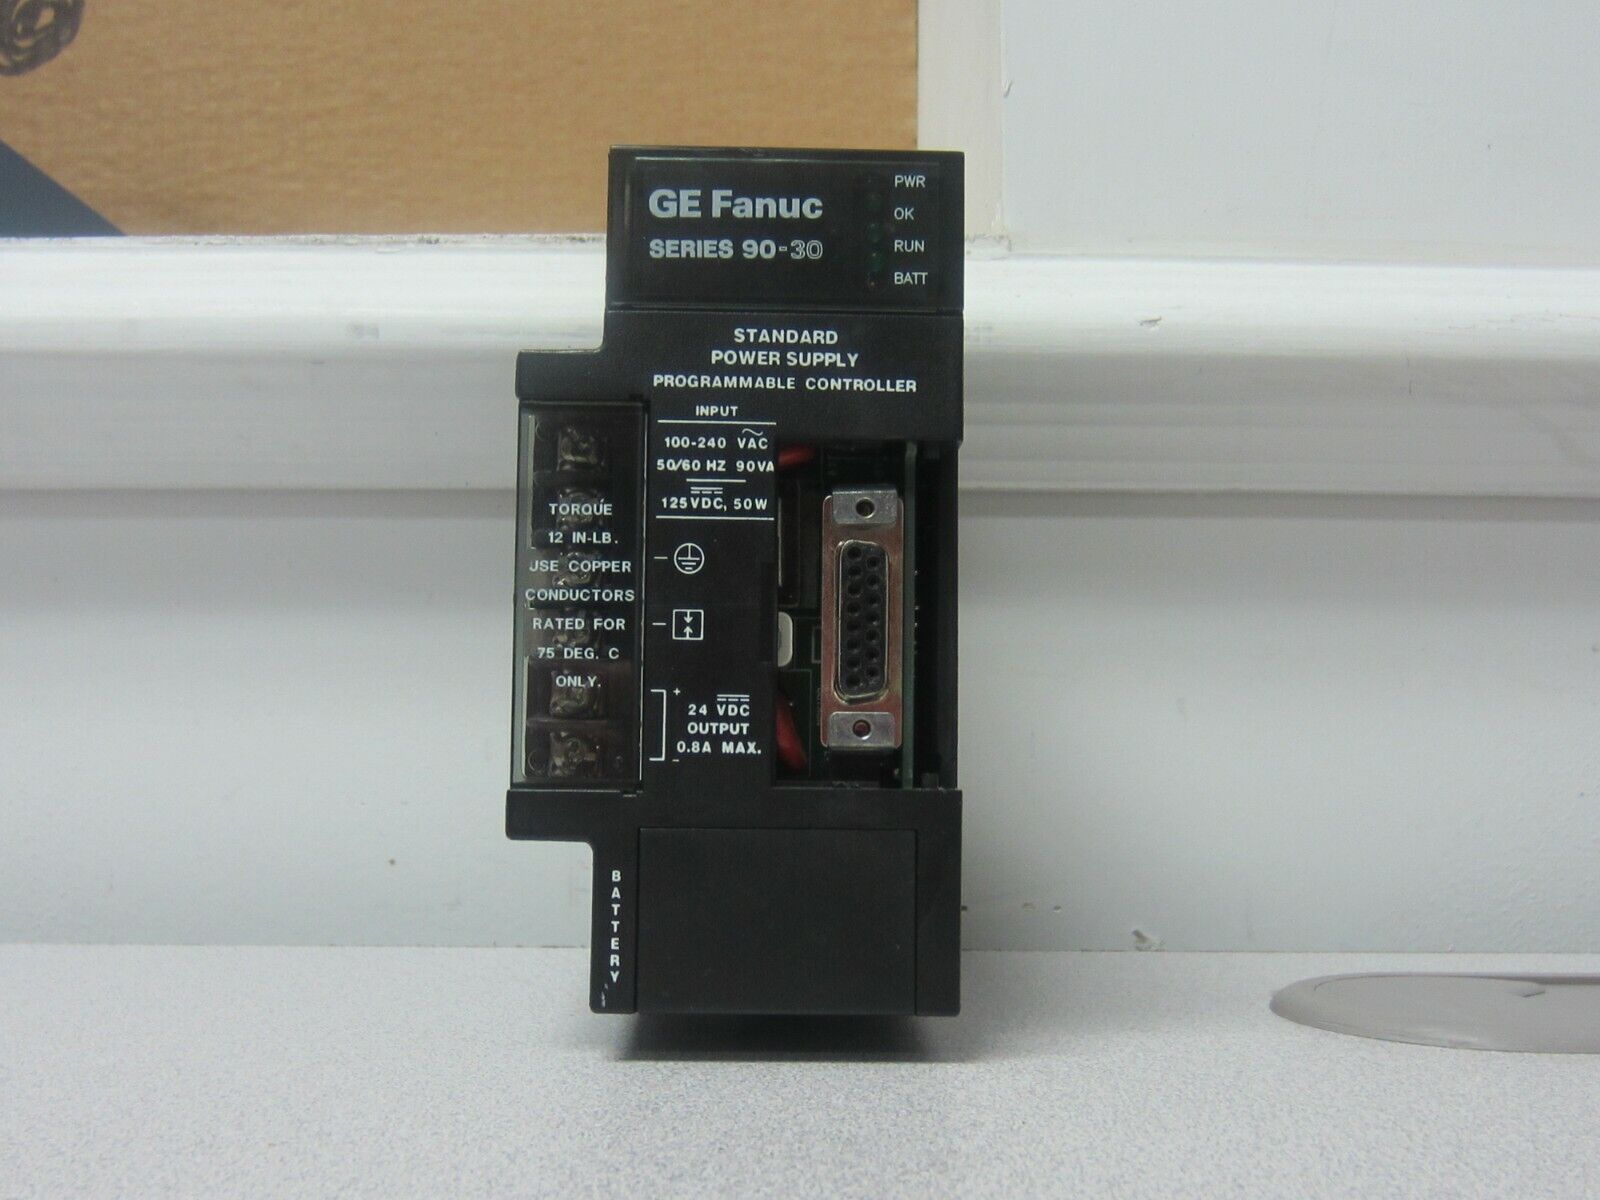 GE FANUC 1C693PWR321U SERIES 90-30 100-2 POWER 30 SUPPLY Max 74% OFF Reservation WATTS